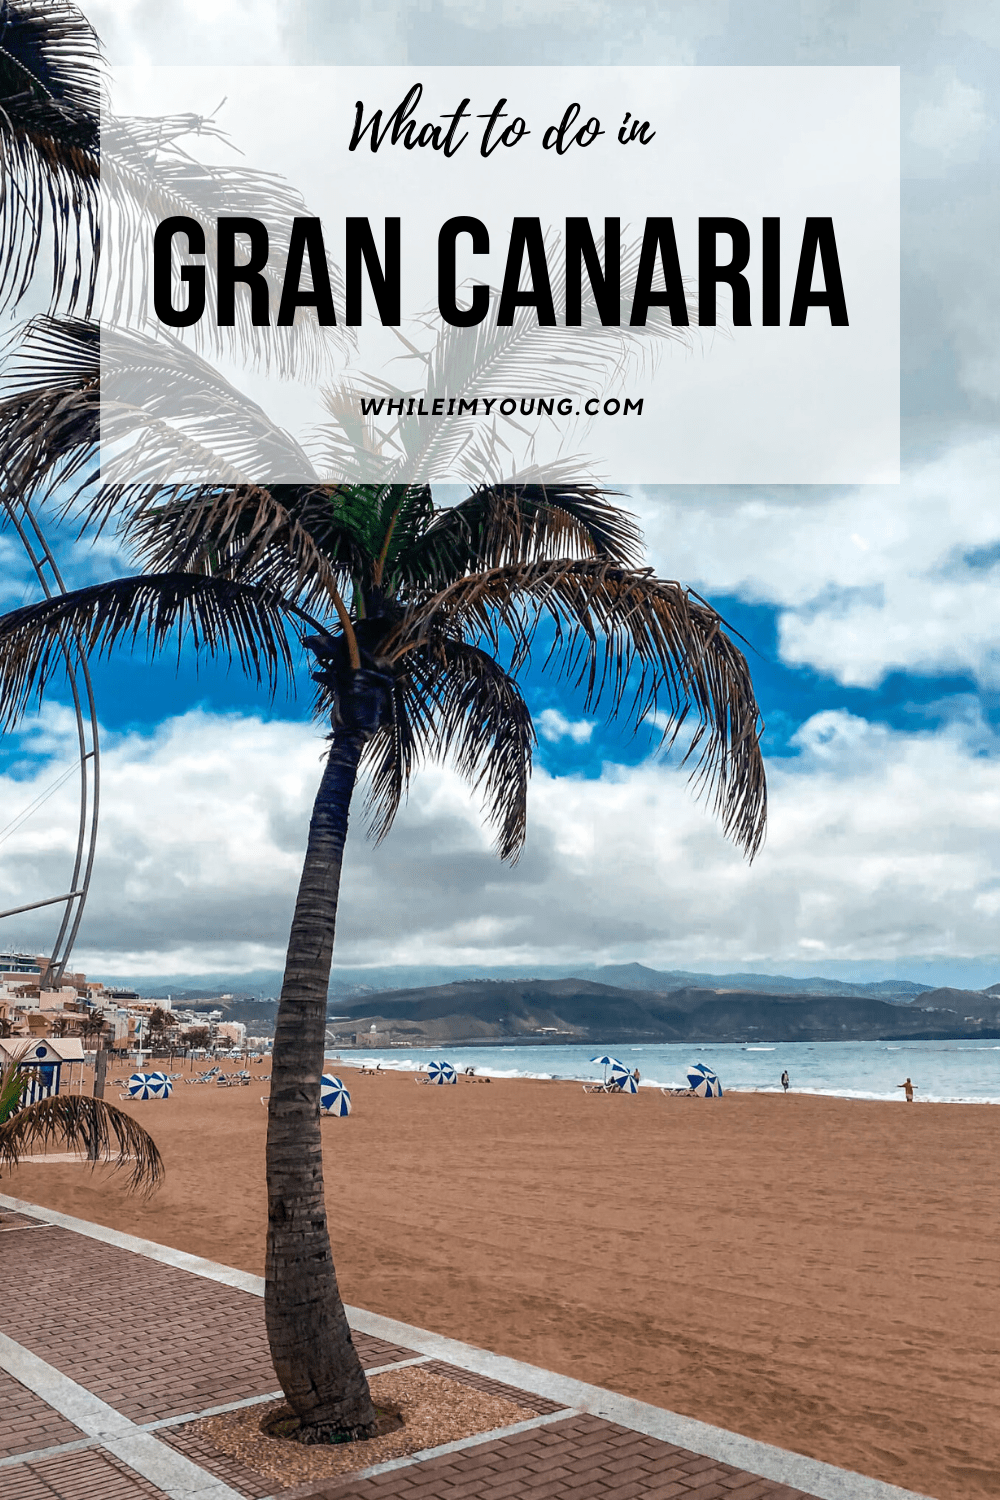 Top things to do in Gran Canaria